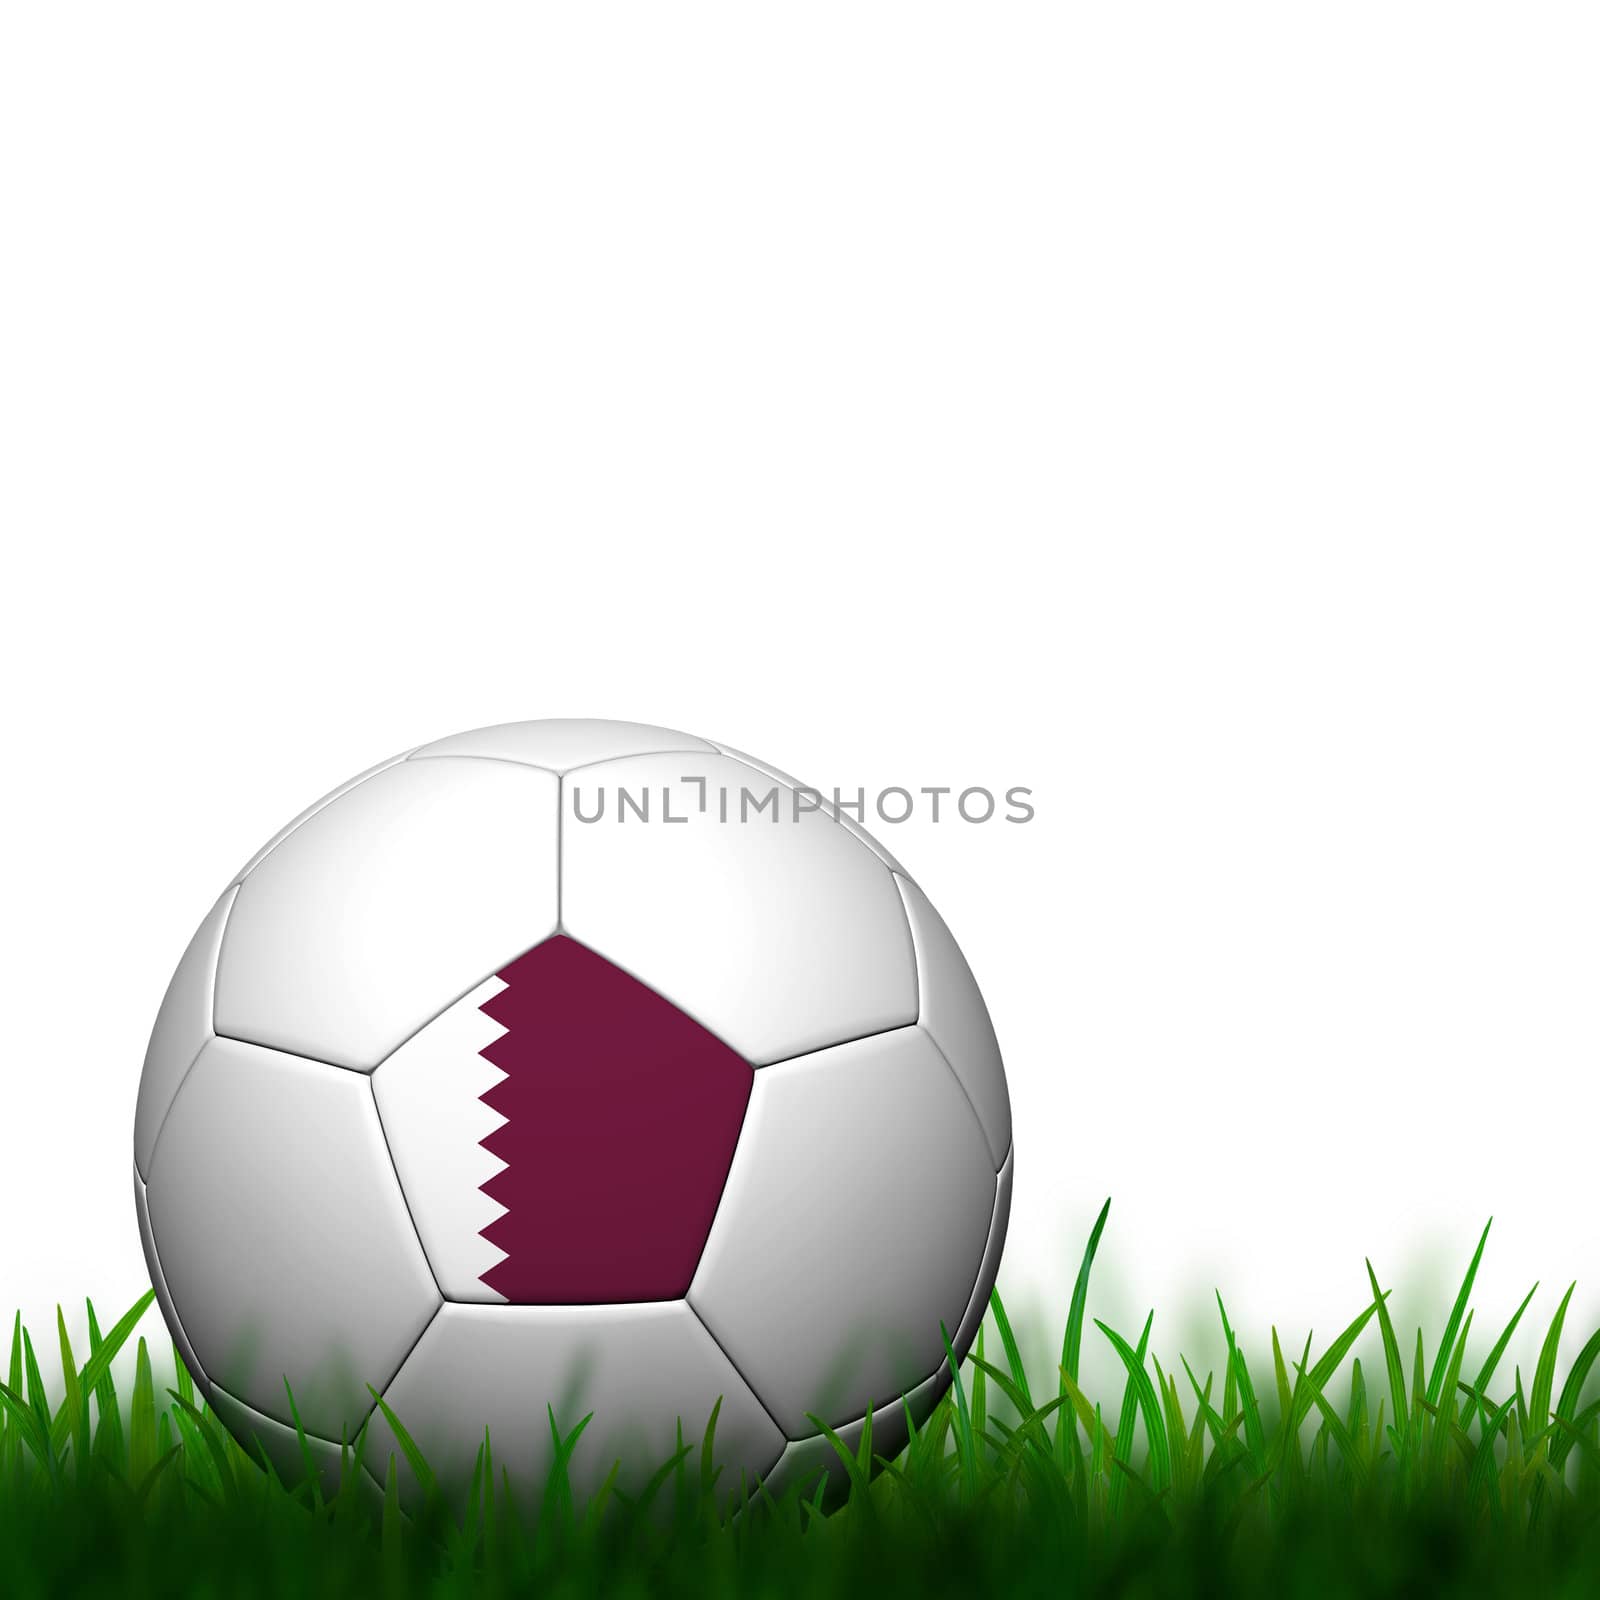 3D Football Qatar Flag Patter in green grass on white background